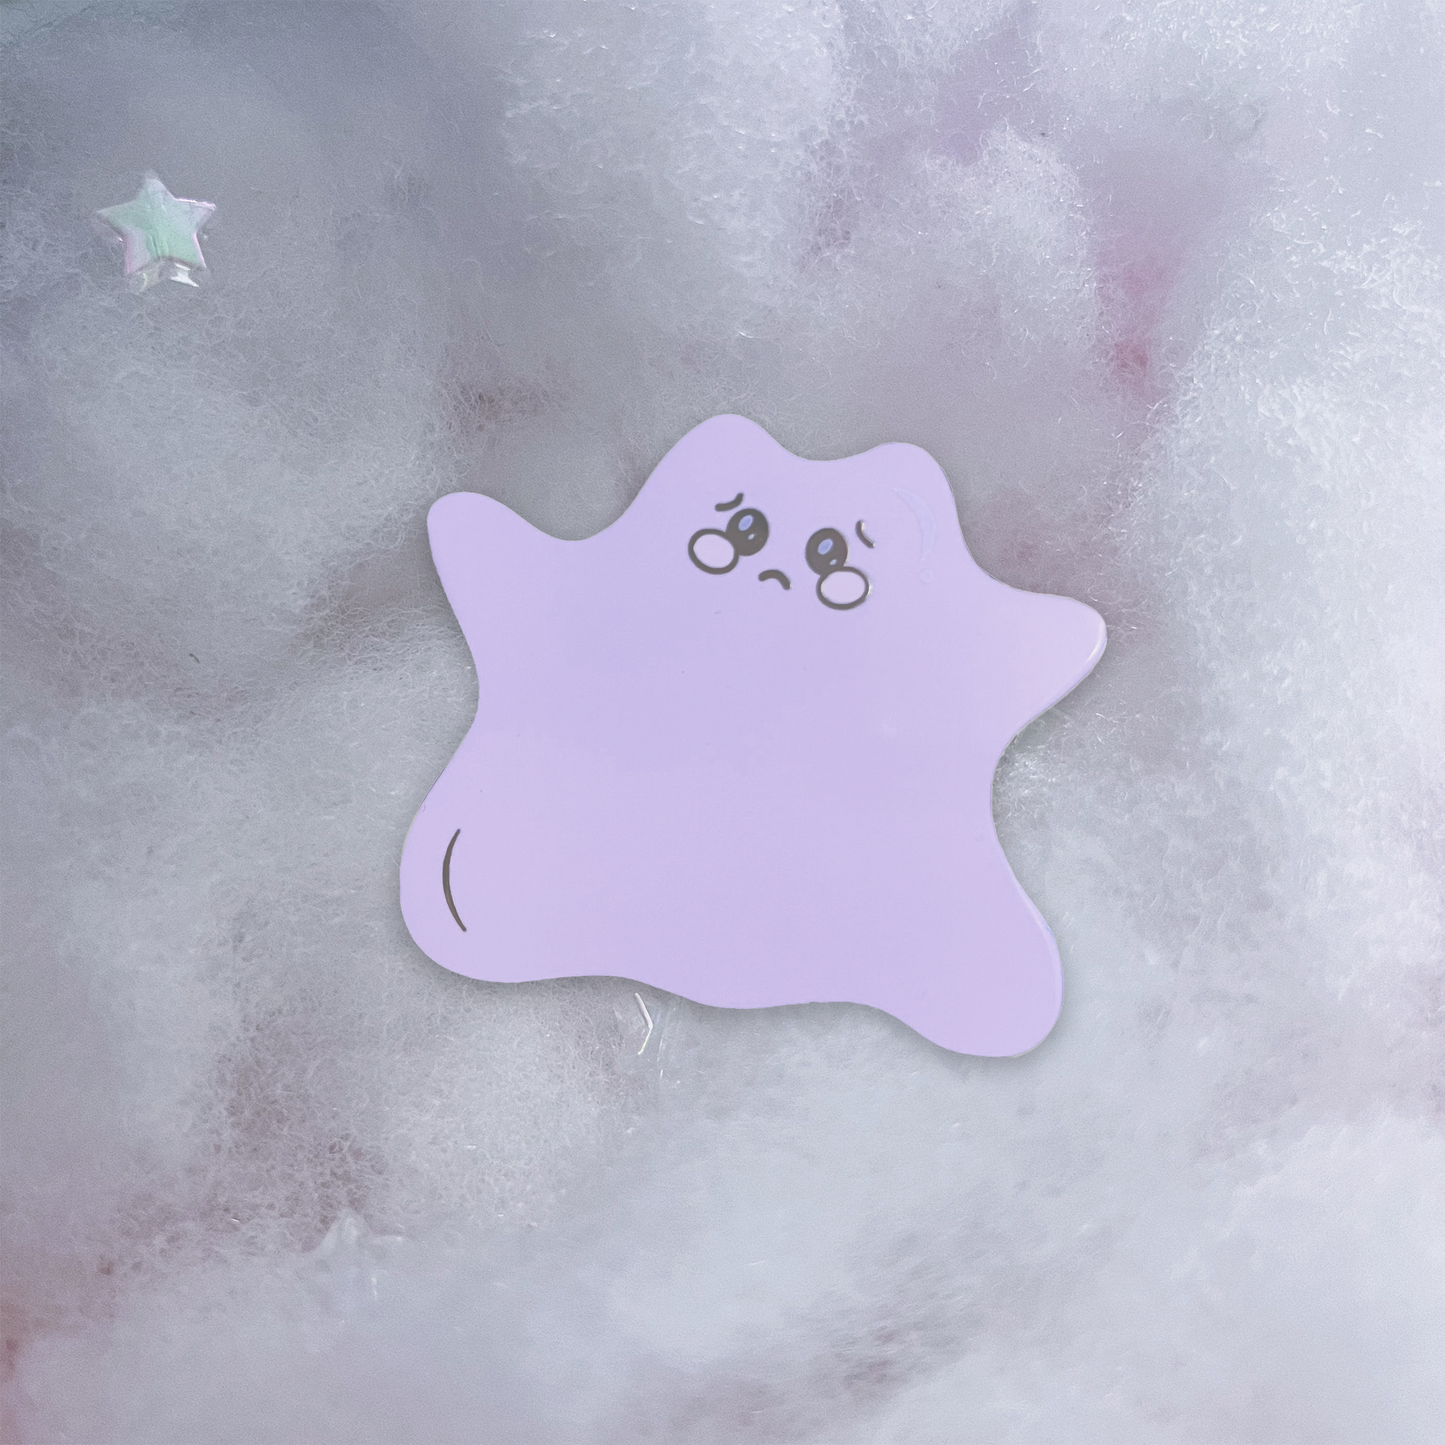 Crybaby Ditto Enamel Pin in Silver Variant